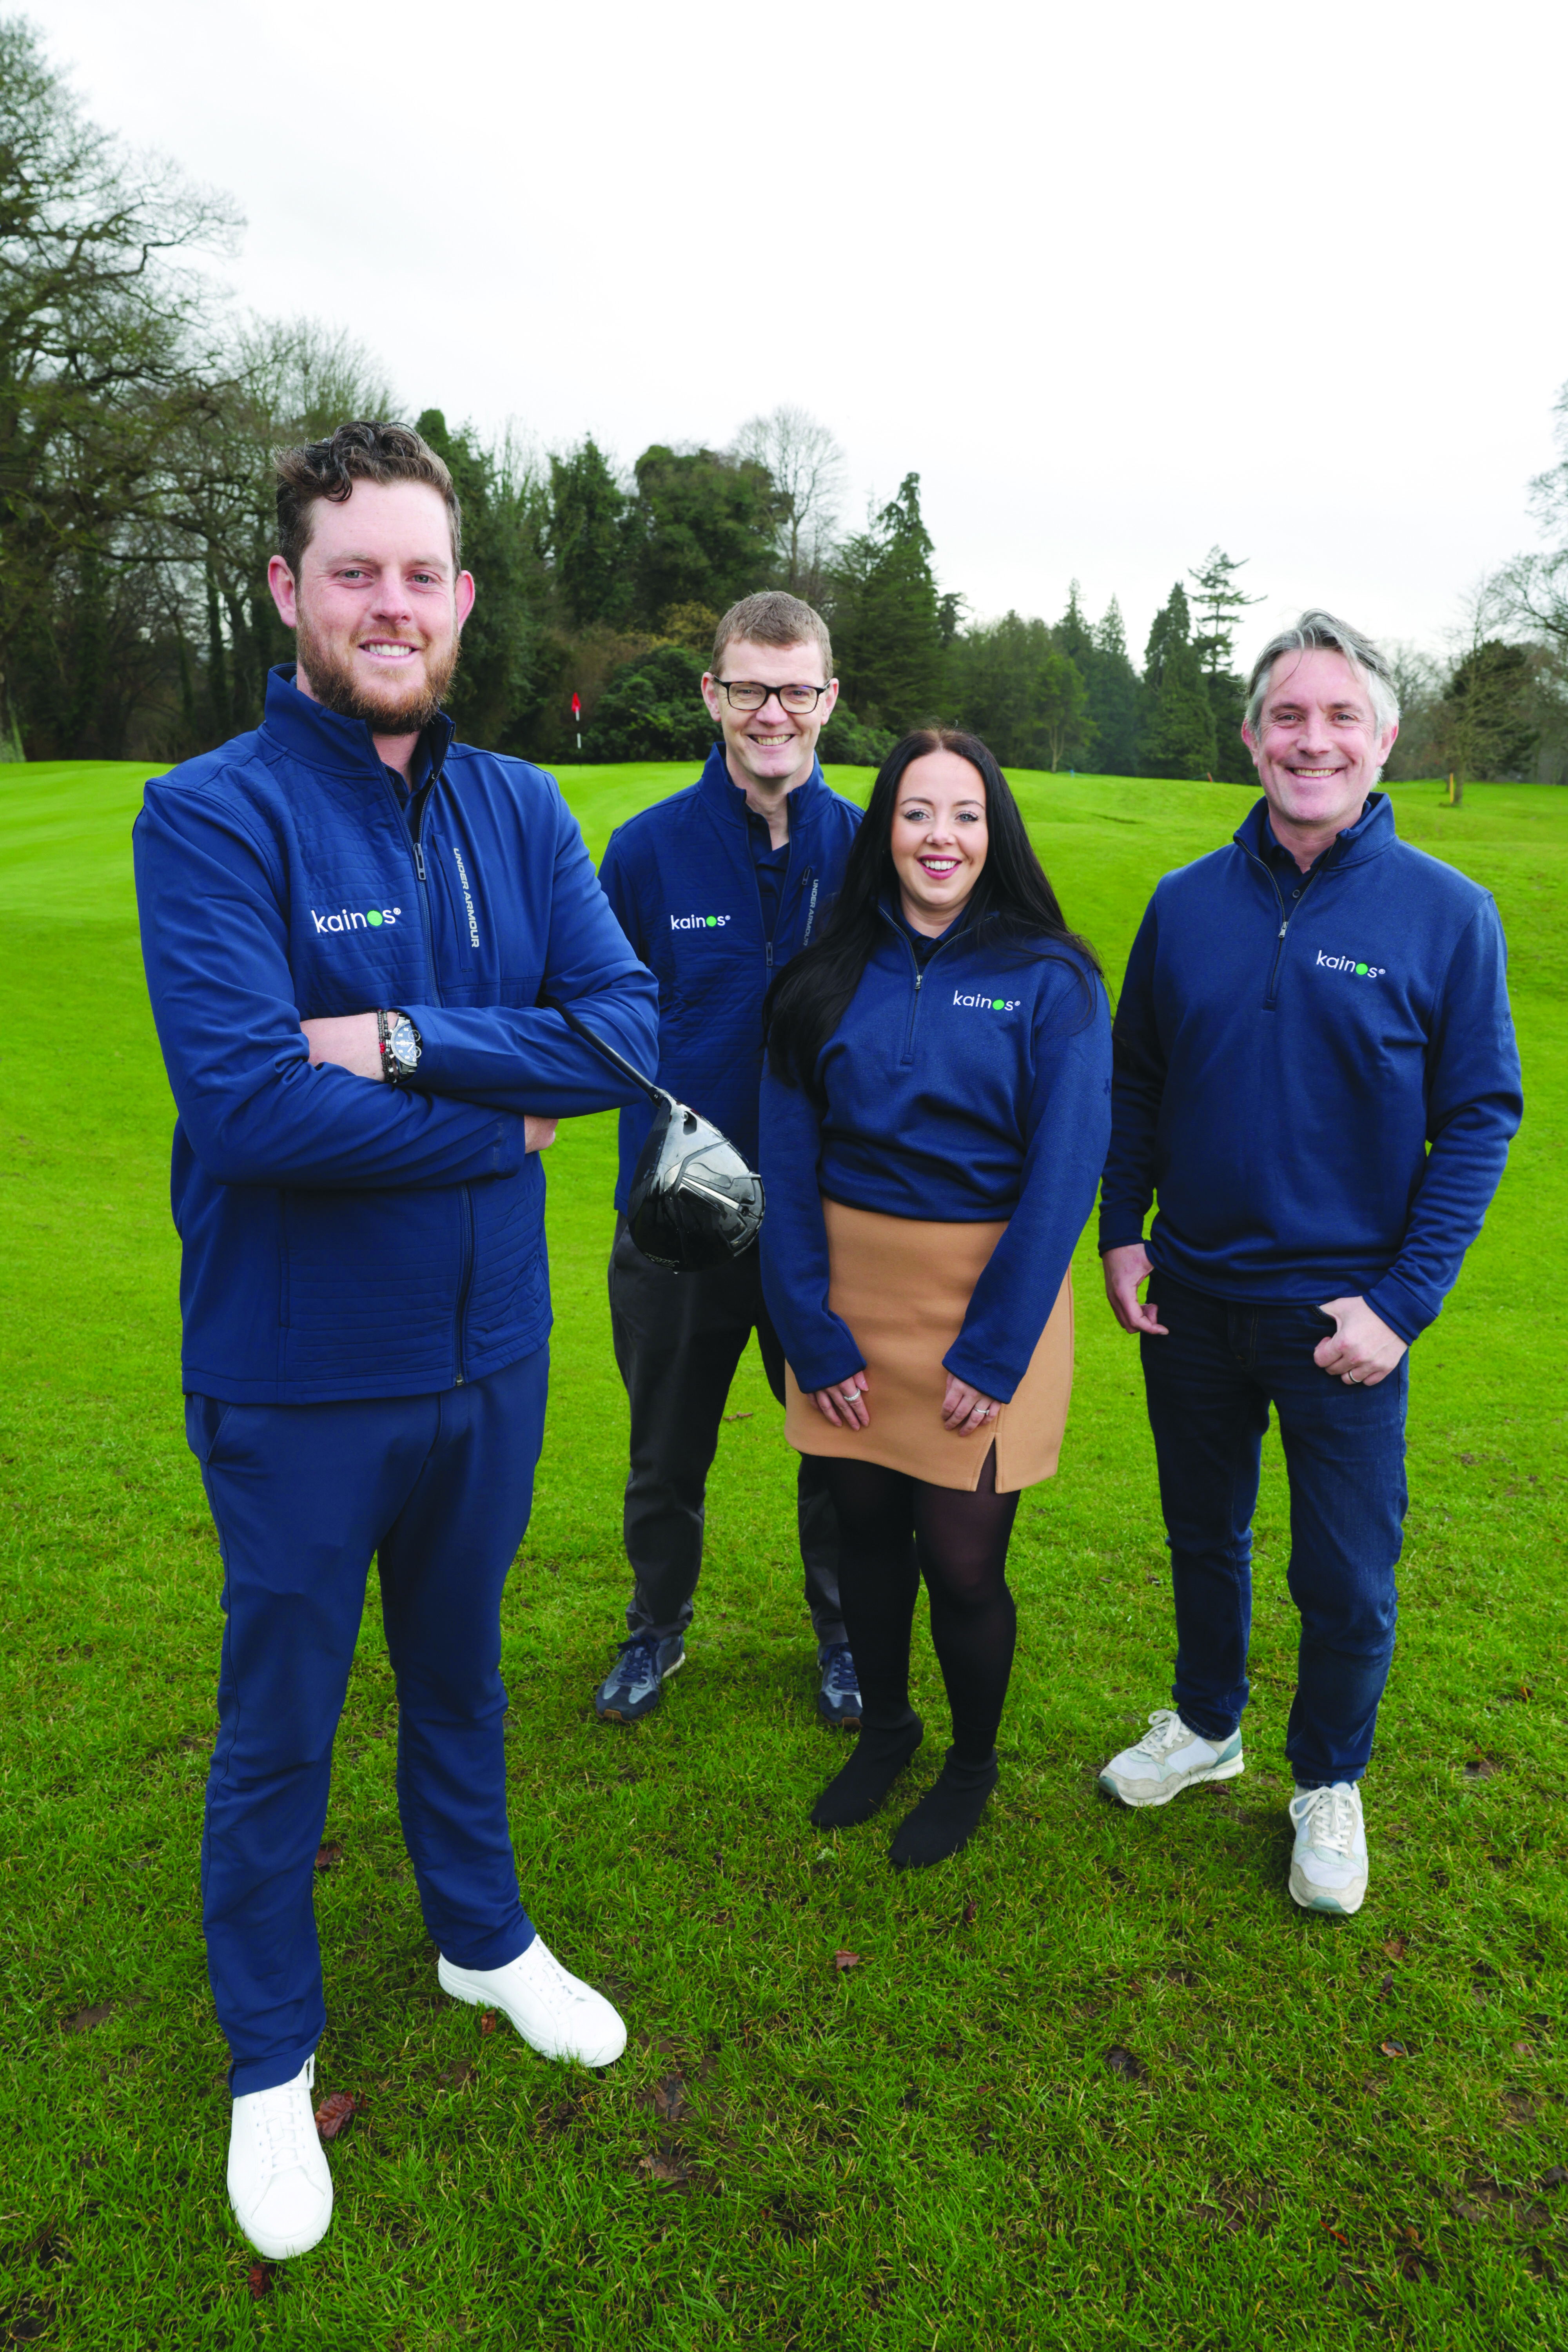 Matthew McClean with Malachy Smith, Workday Global Practice Leader, Kainos, Ciara Fusco, Marketing Manager, Kainos, Richard Doyle, Sales VP North America, Kainos, ahead of his trip to the Masters this week